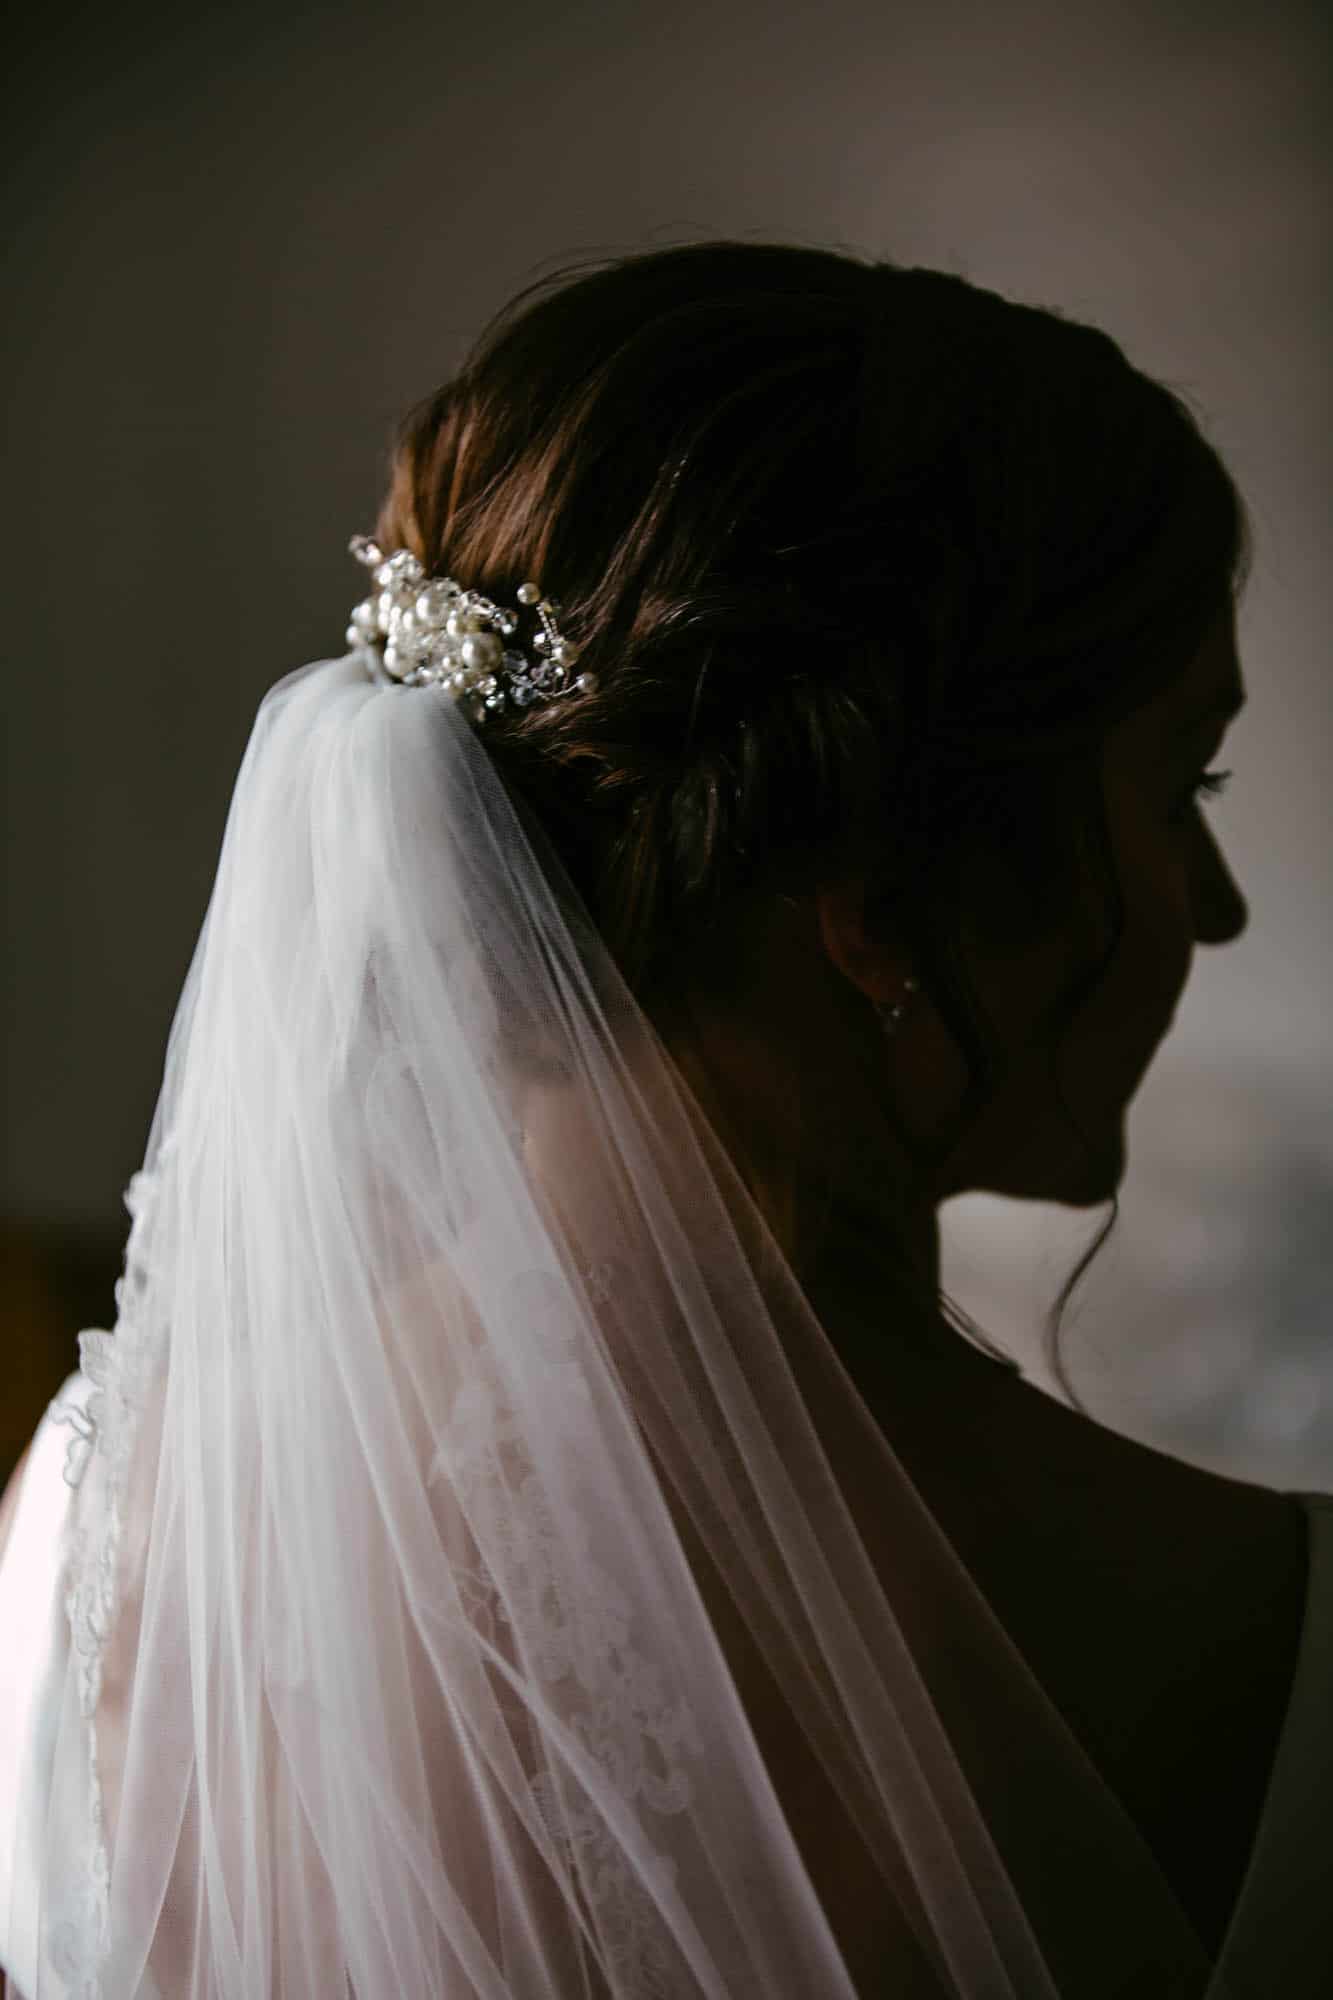 A bride with a veil and pearls in her hair.